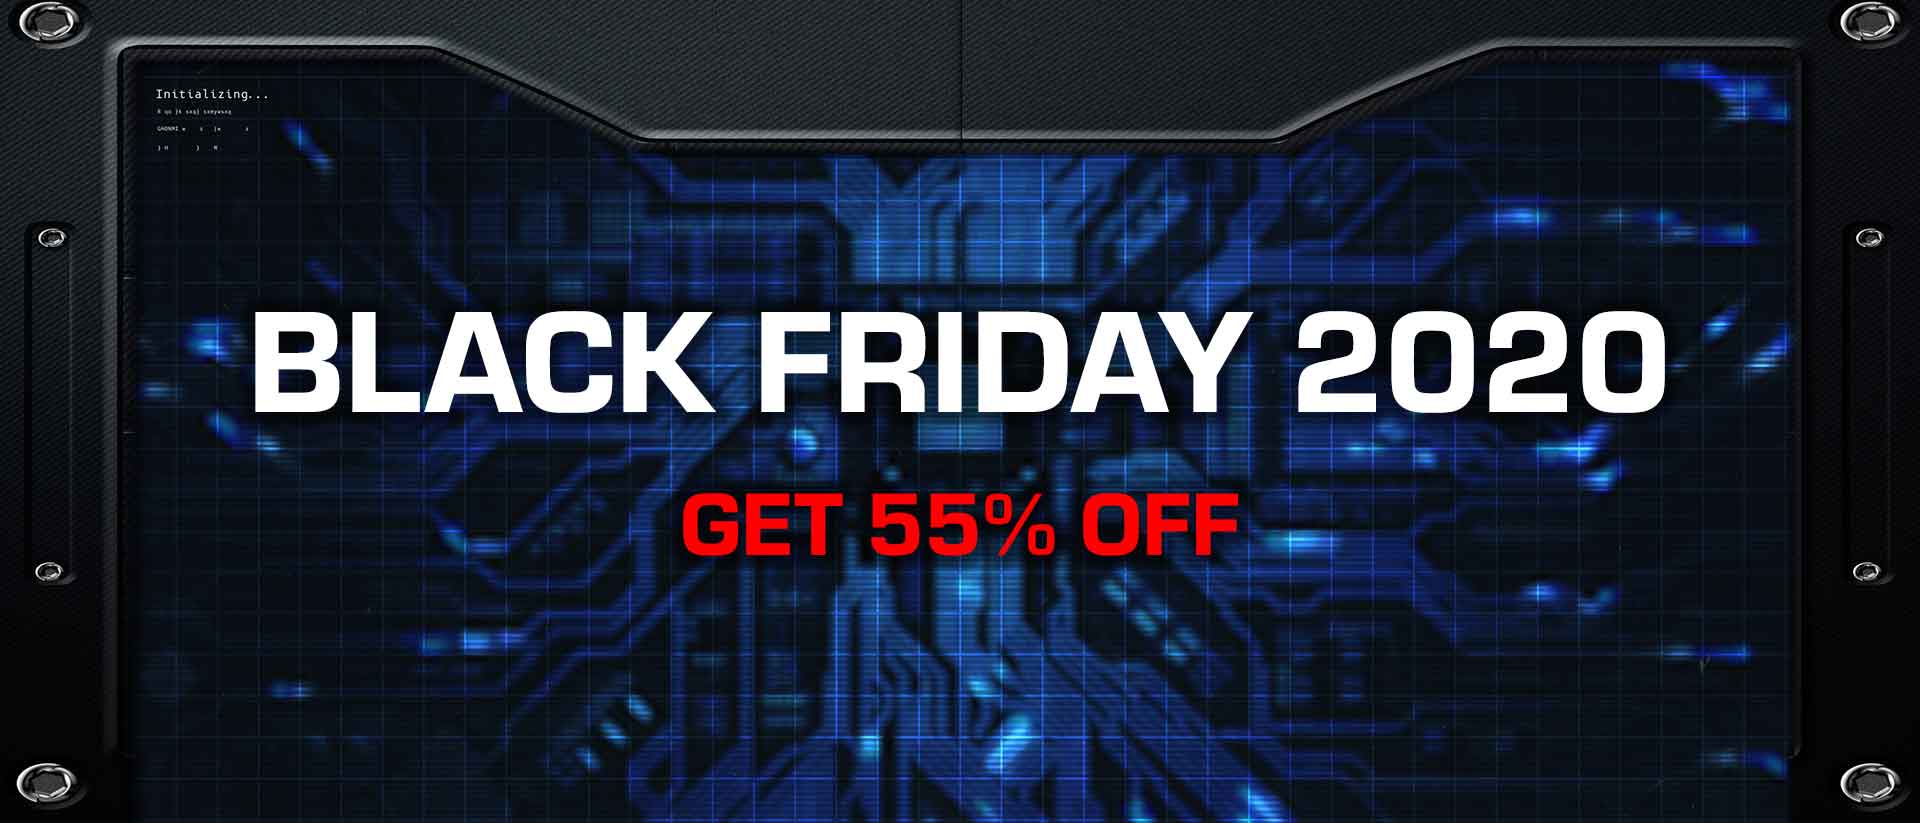 Black Friday 2020 Sale Announcement | Get Up To 55% off VFX Stock Footage